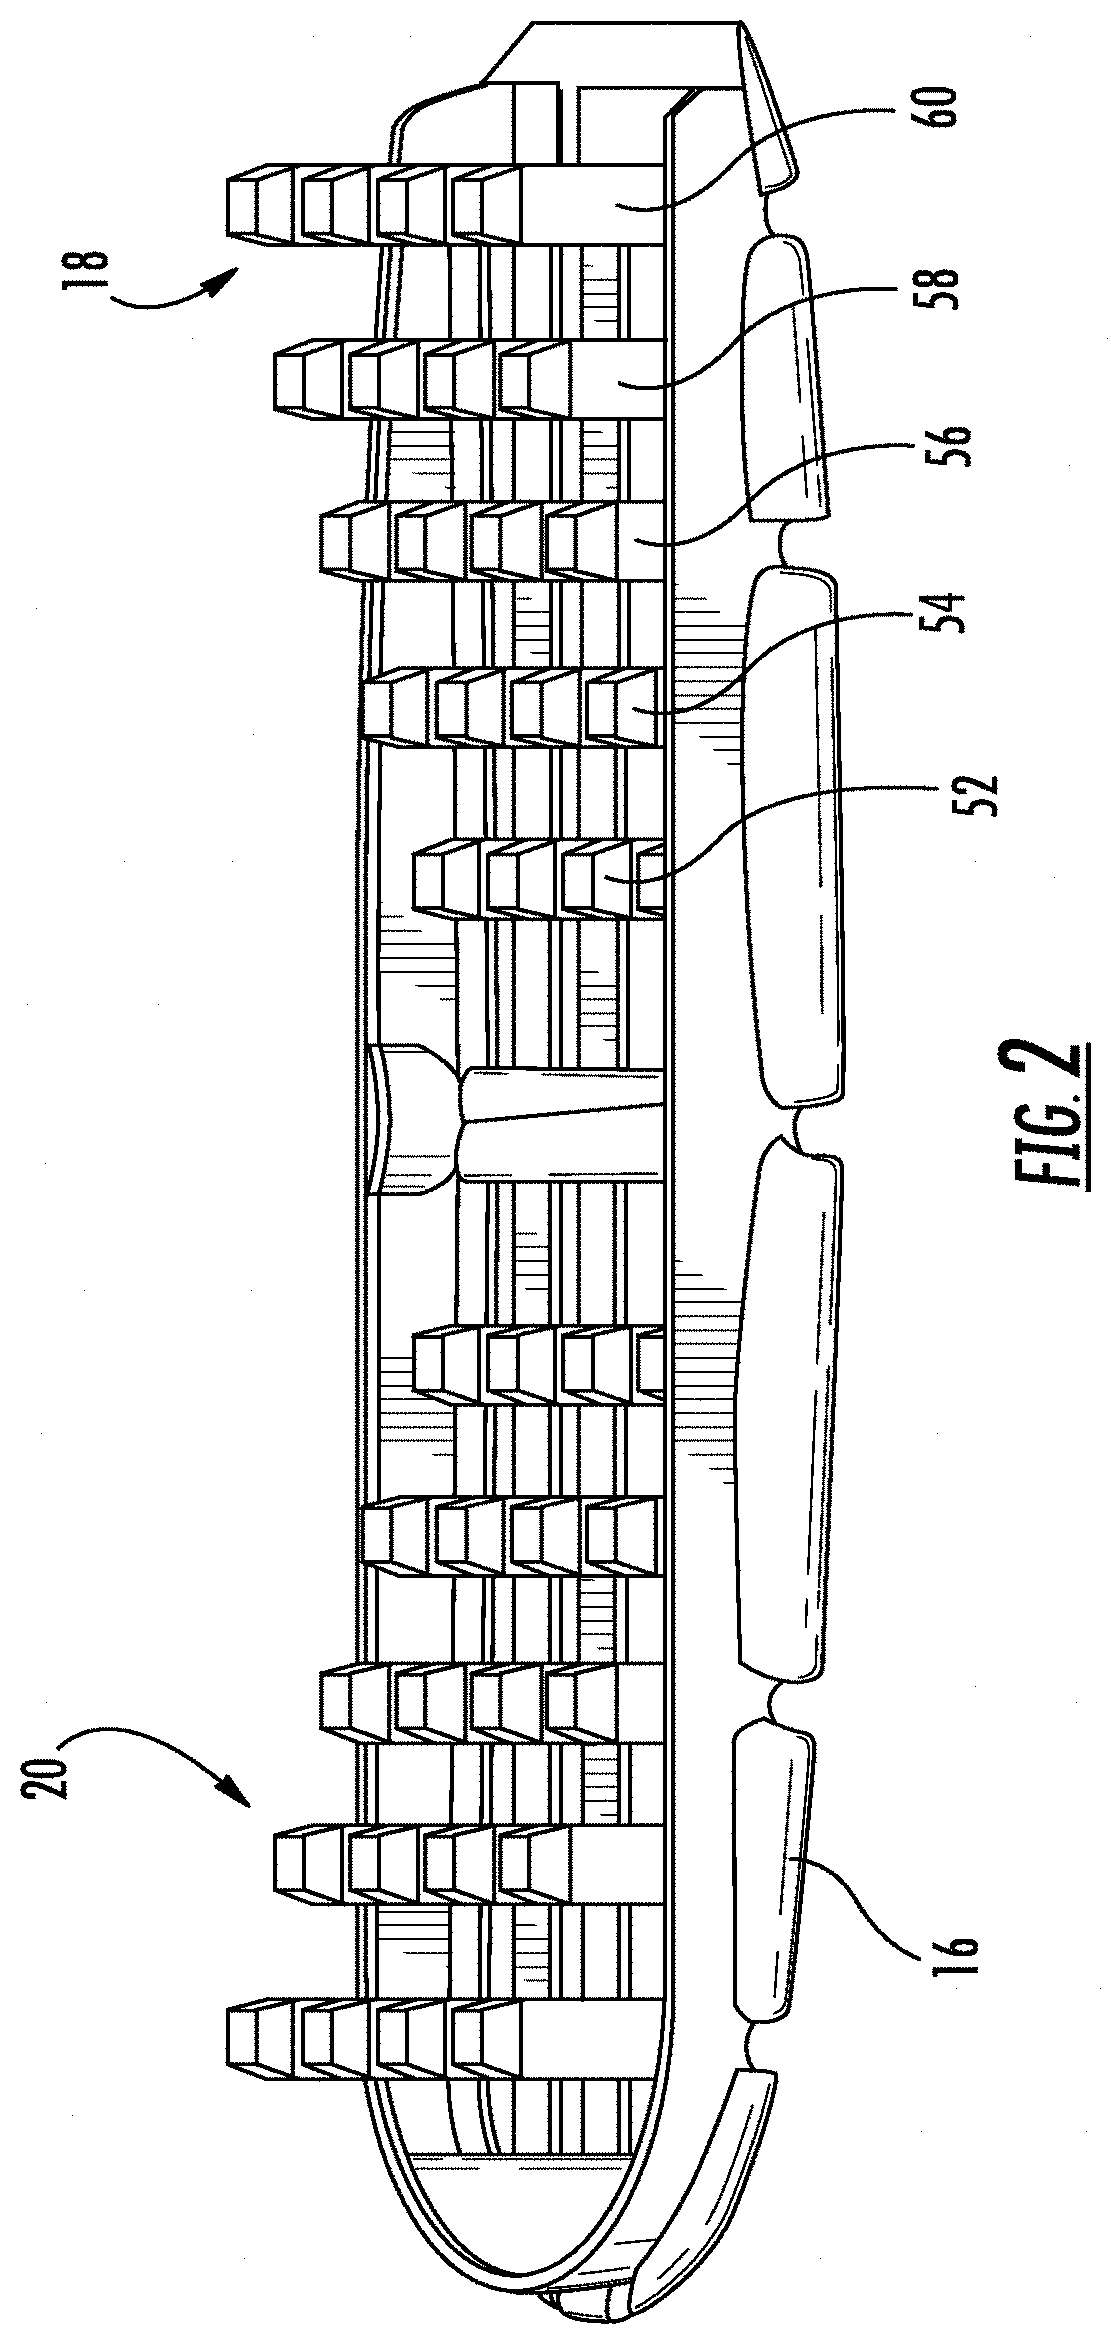 Expandable and adjustable lordosis interbody fusion system